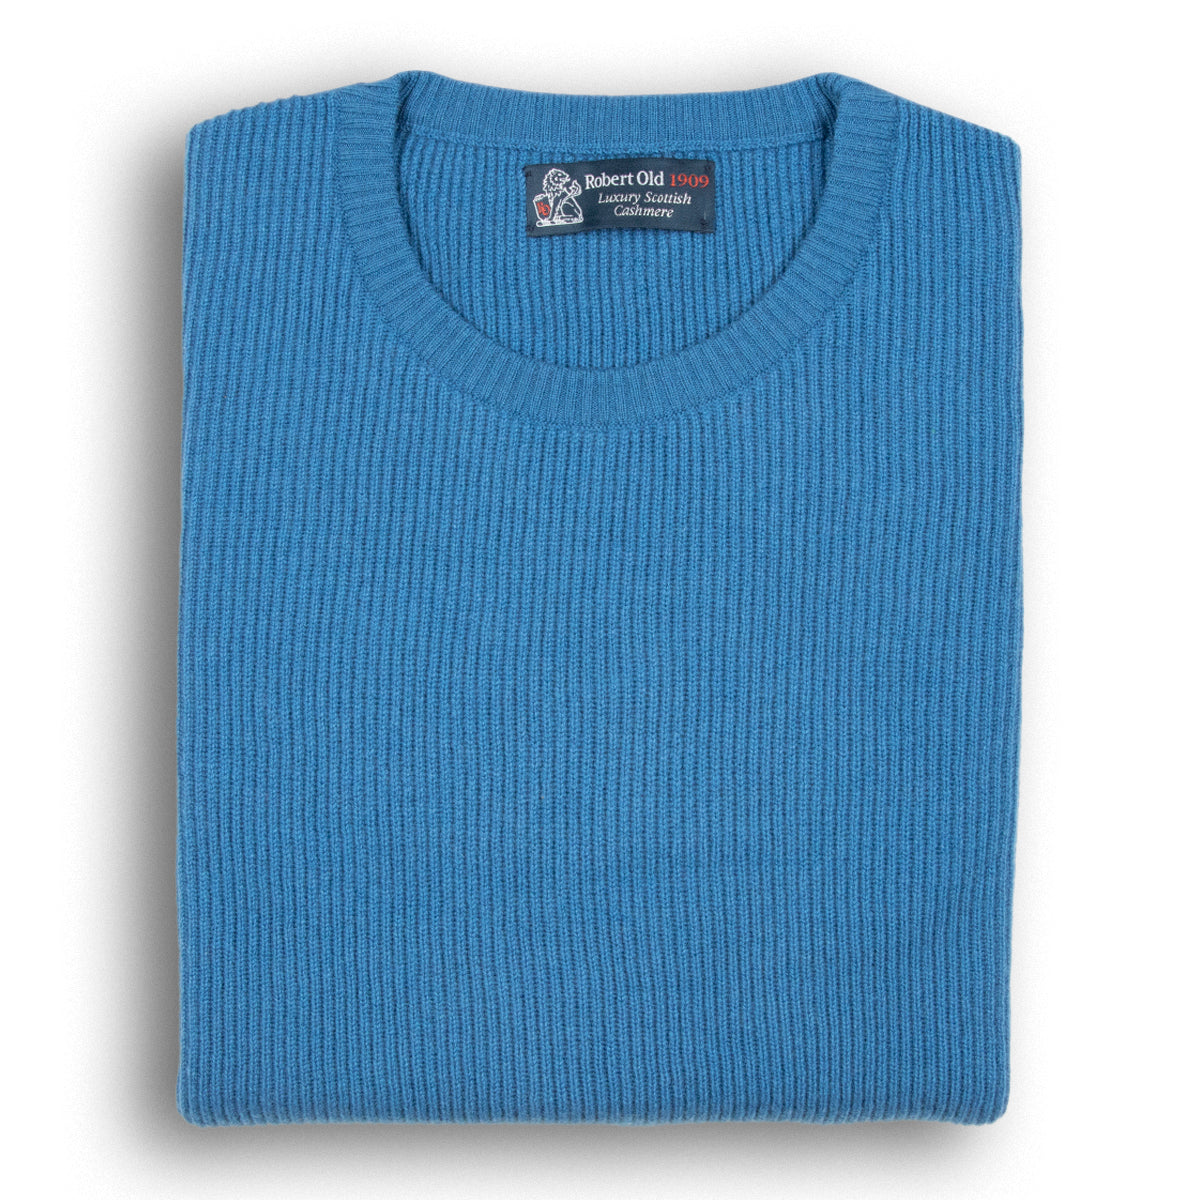 Airforce Blue Huntley 2ply Rib Crew Neck Cashmere Sweater  Robert Old Airforce UK 36" 